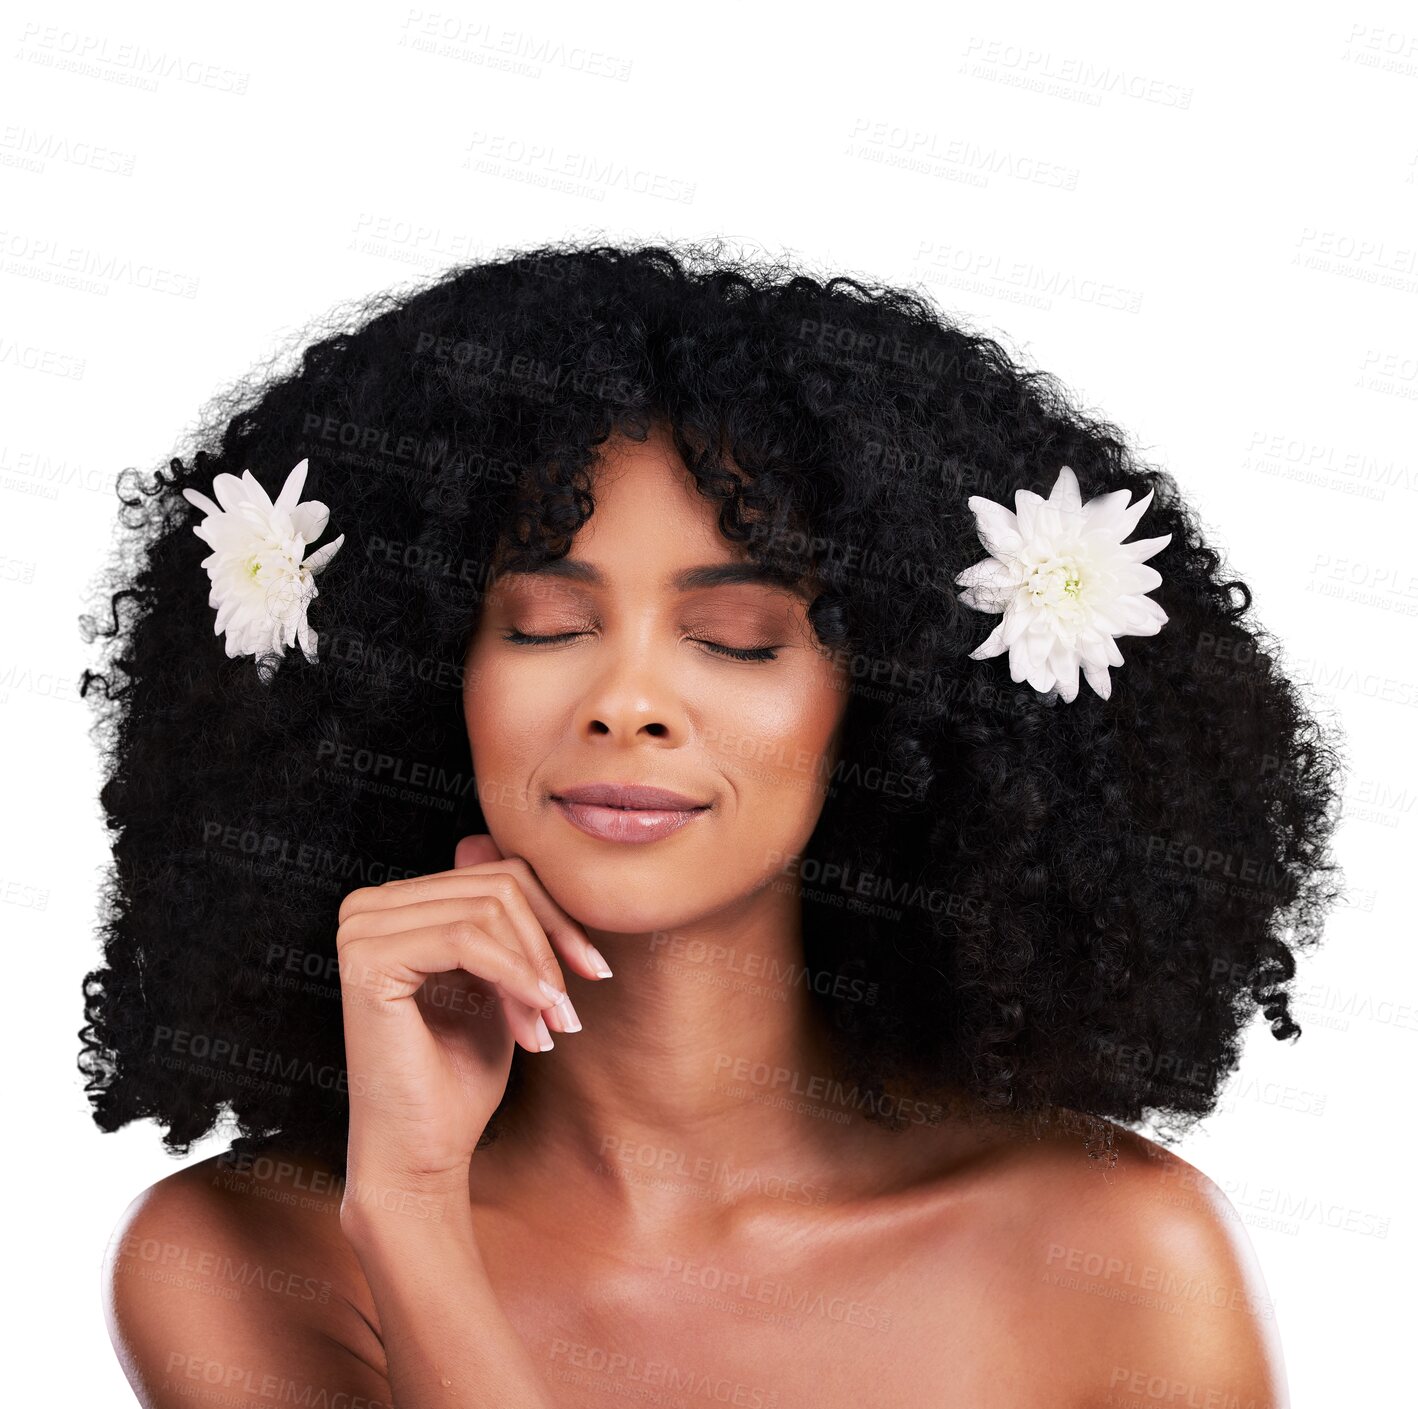 Buy stock photo Woman, flowers for hair care and natural beauty, afro hairstyle and organic cosmetic care with face isolated on png transparent background. Wellness, glow and curls, nature for treatment with texture